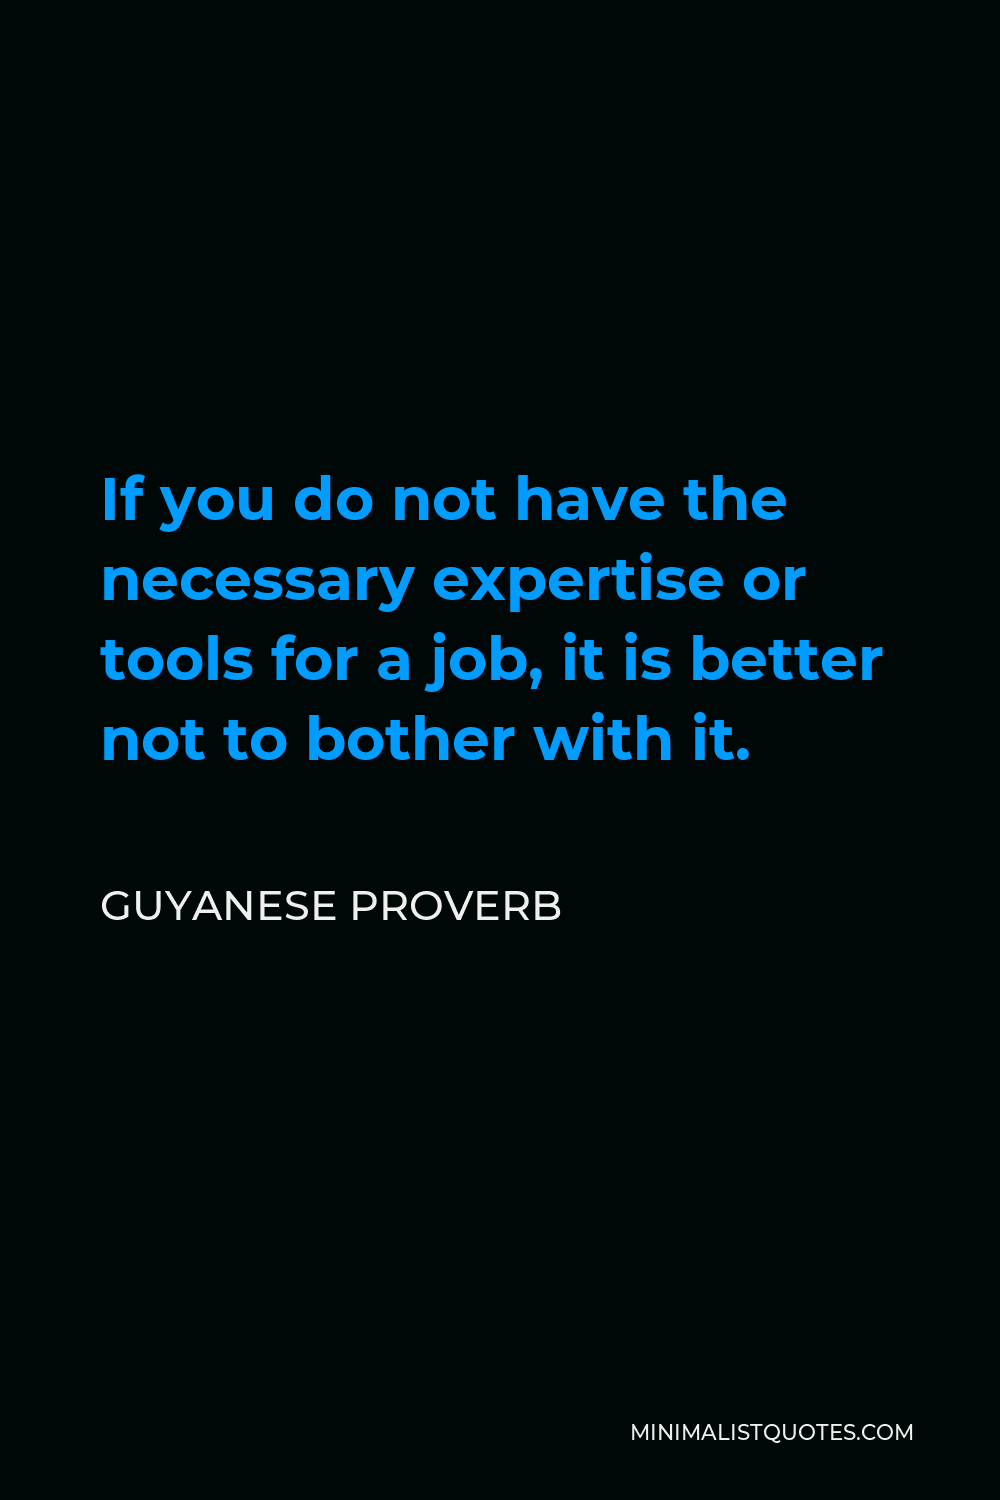 Guyanese Proverb Quote - If you do not have the necessary expertise or tools for a job, it is better not to bother with it.